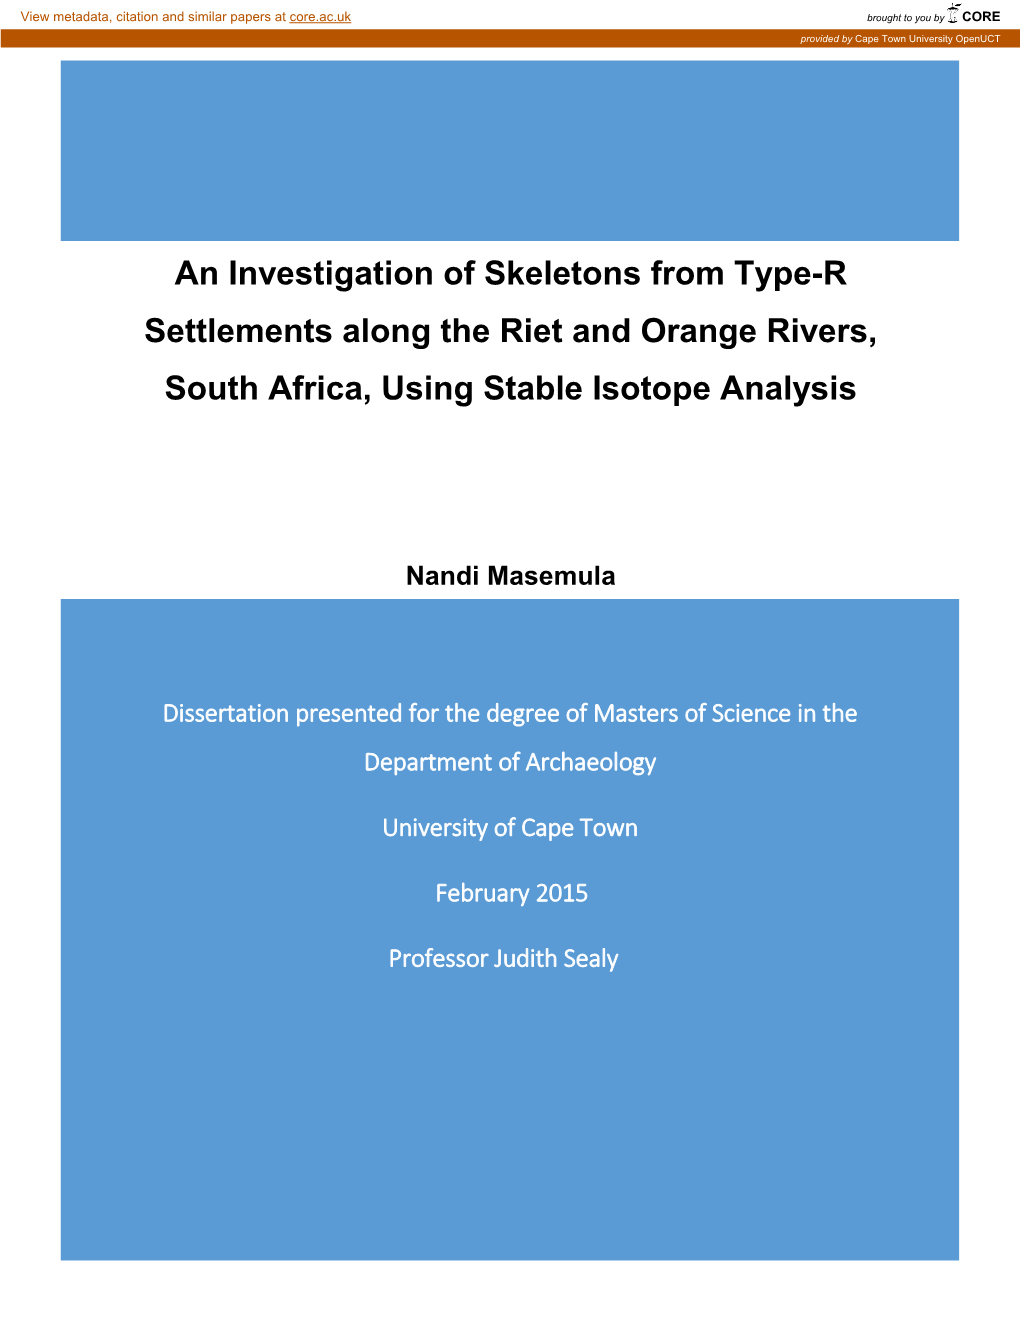 An Investigation of Skeletons from Type-R Settlements Along the Riet and Orange Rivers, South Africa, Using Stable Isotope Analysis